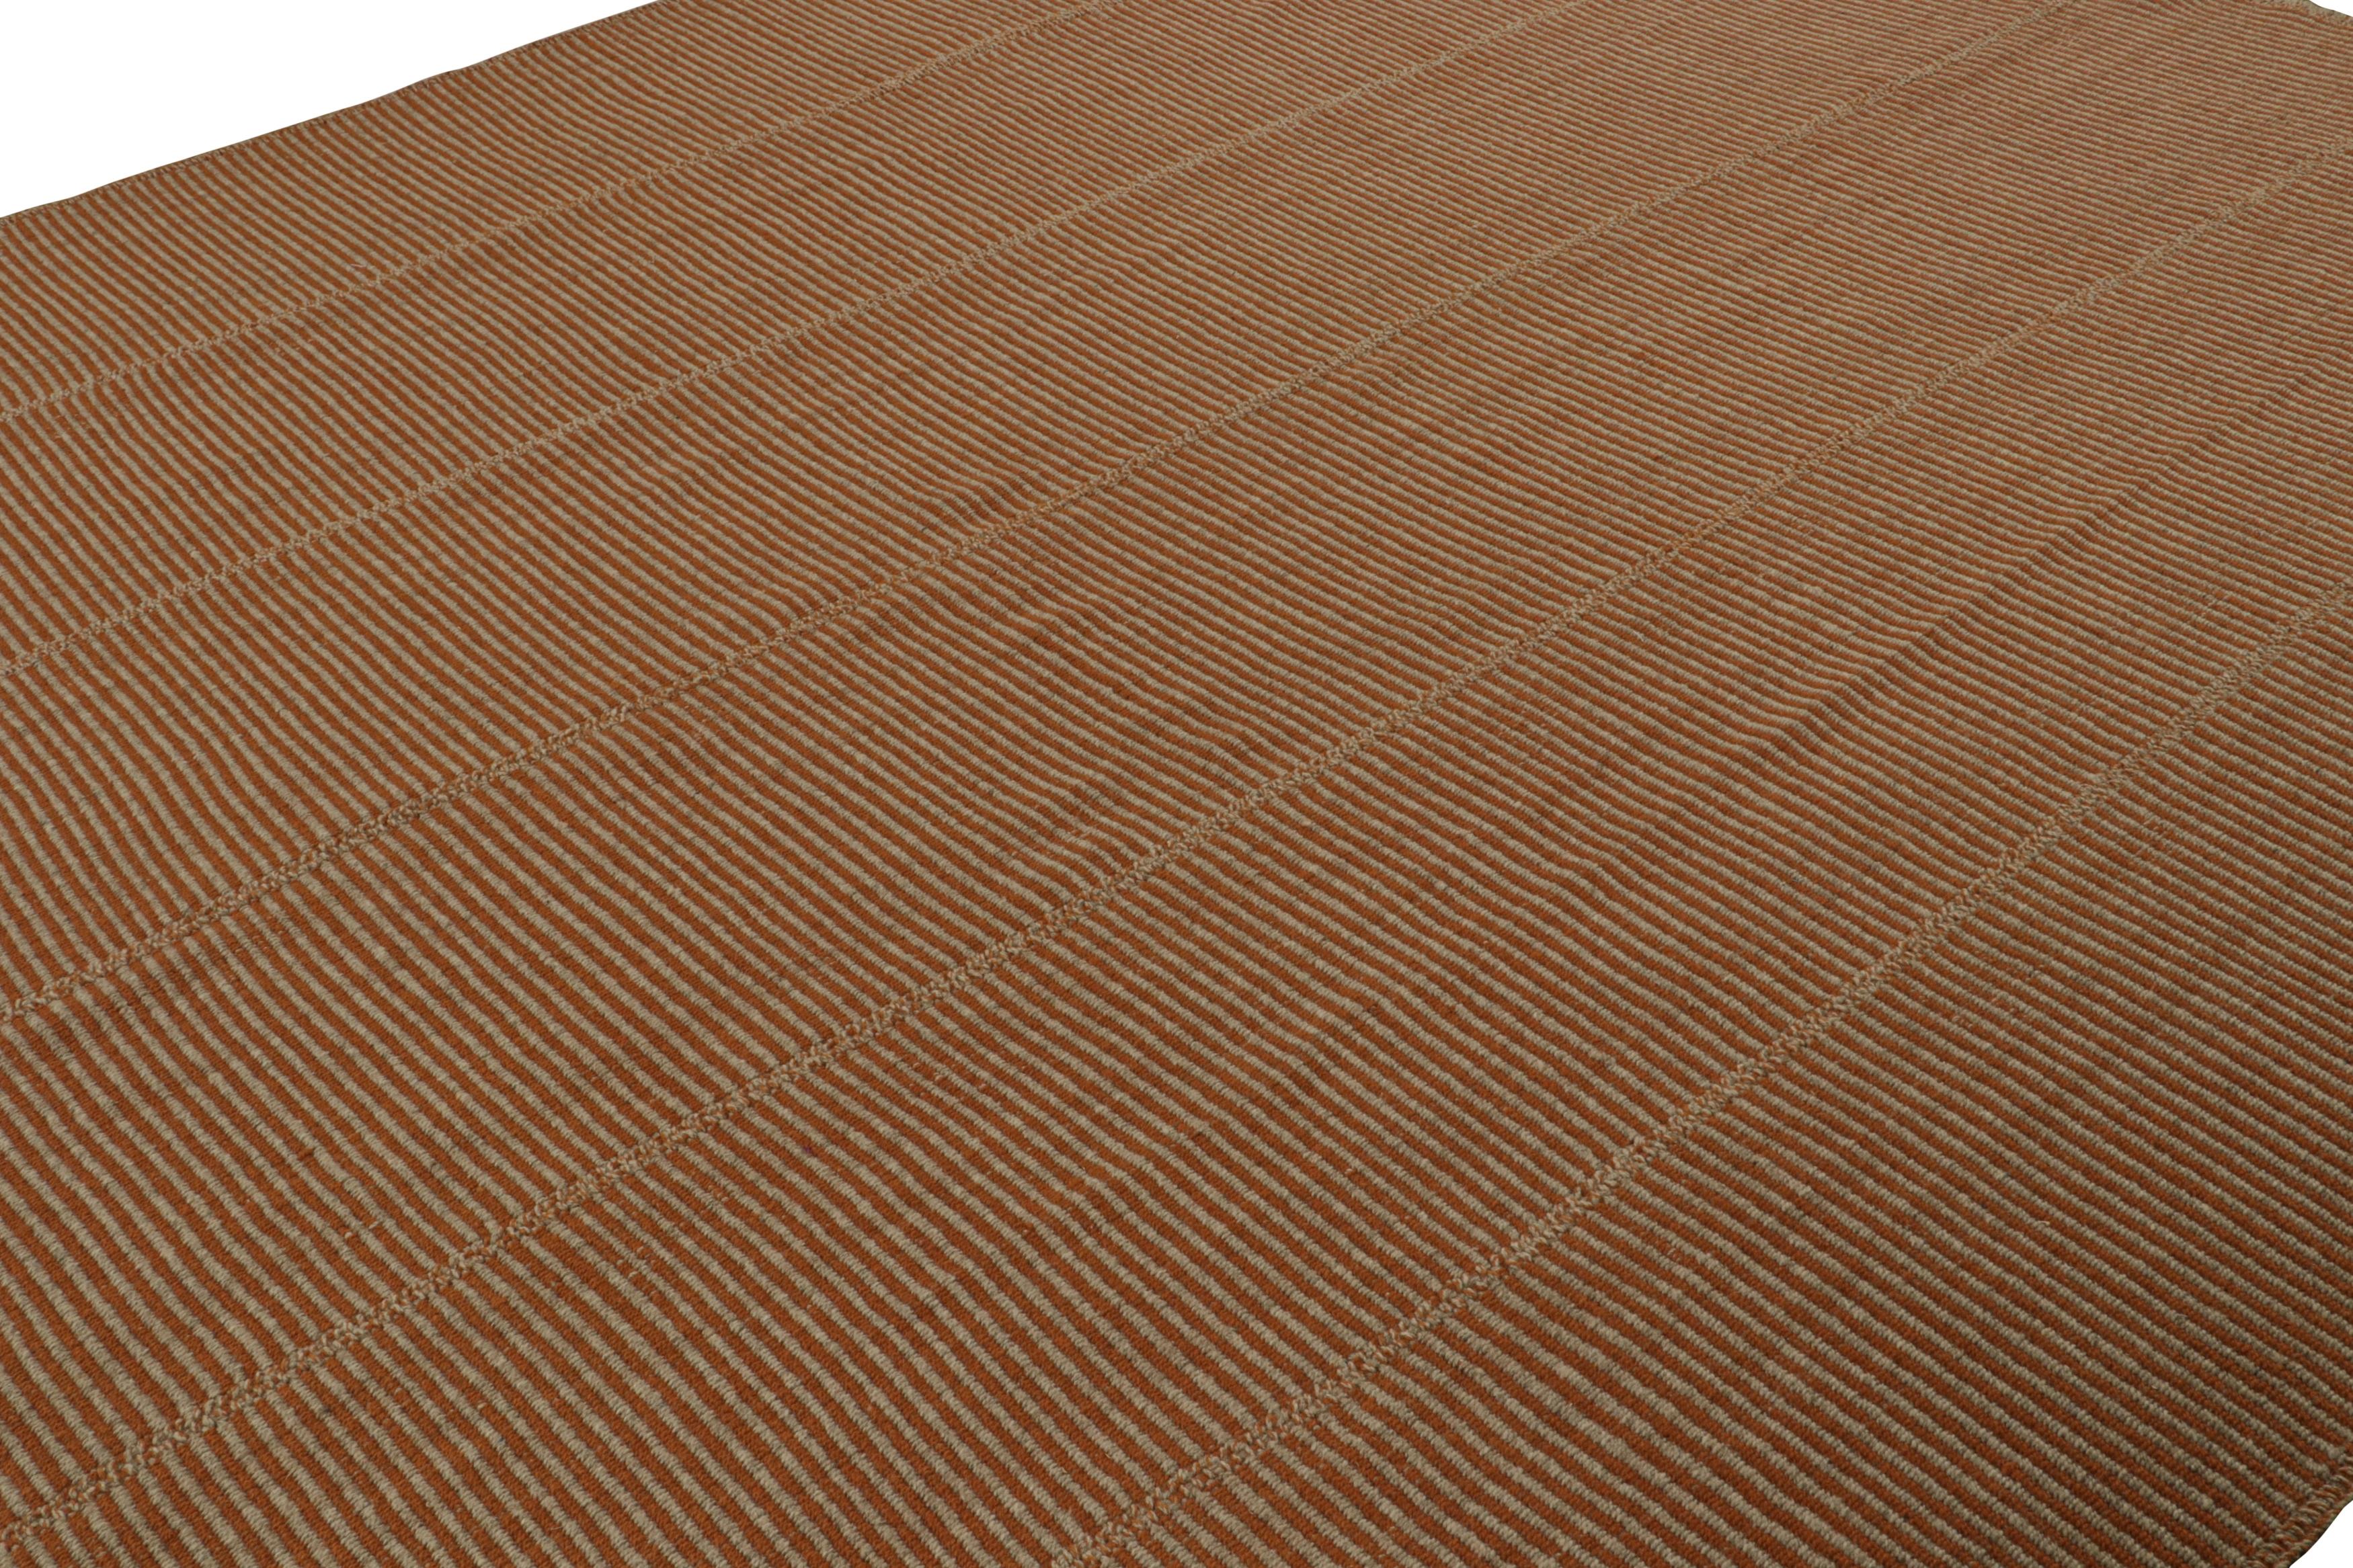 Hand-Woven Rug & Kilim’s Modern Kilim in Beige & Rust orange stripes with Taupe accents  For Sale